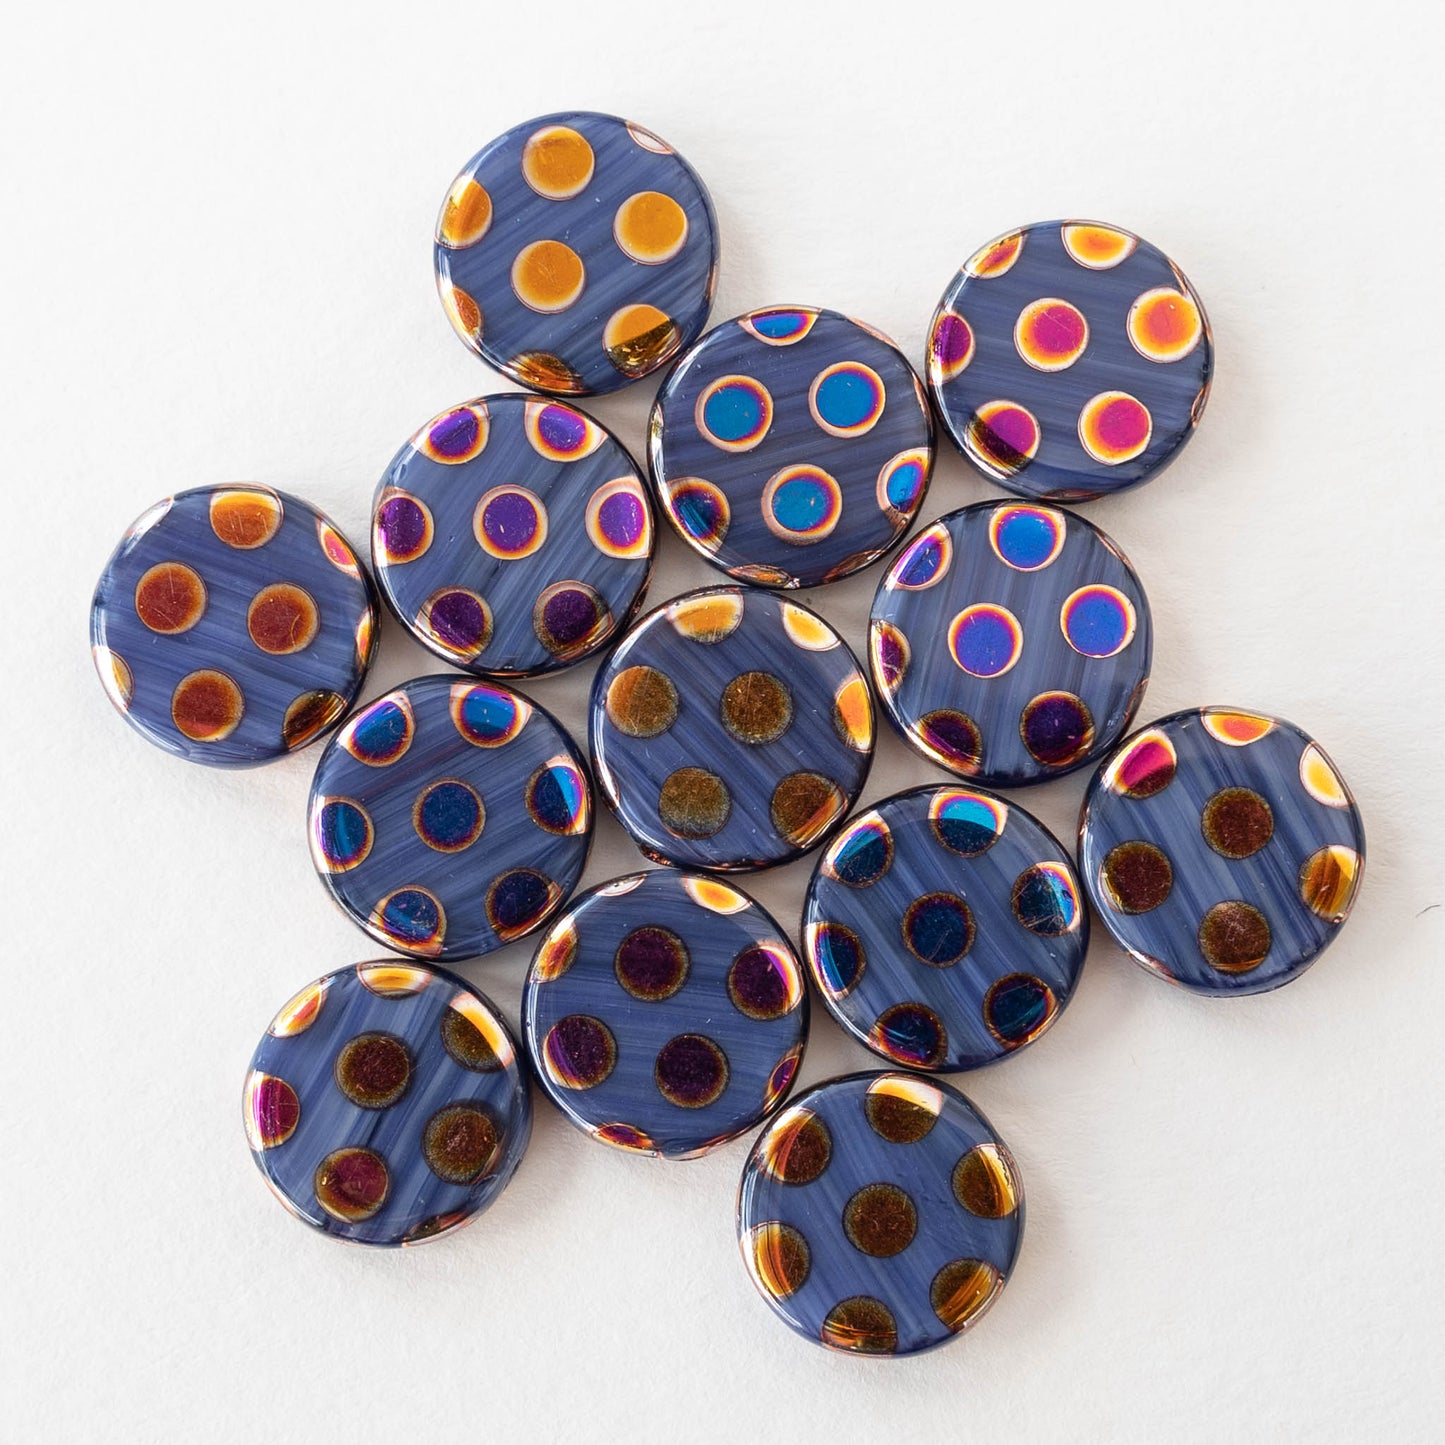 14mm Coin Beads - Polka Dots on Black - 10 beads